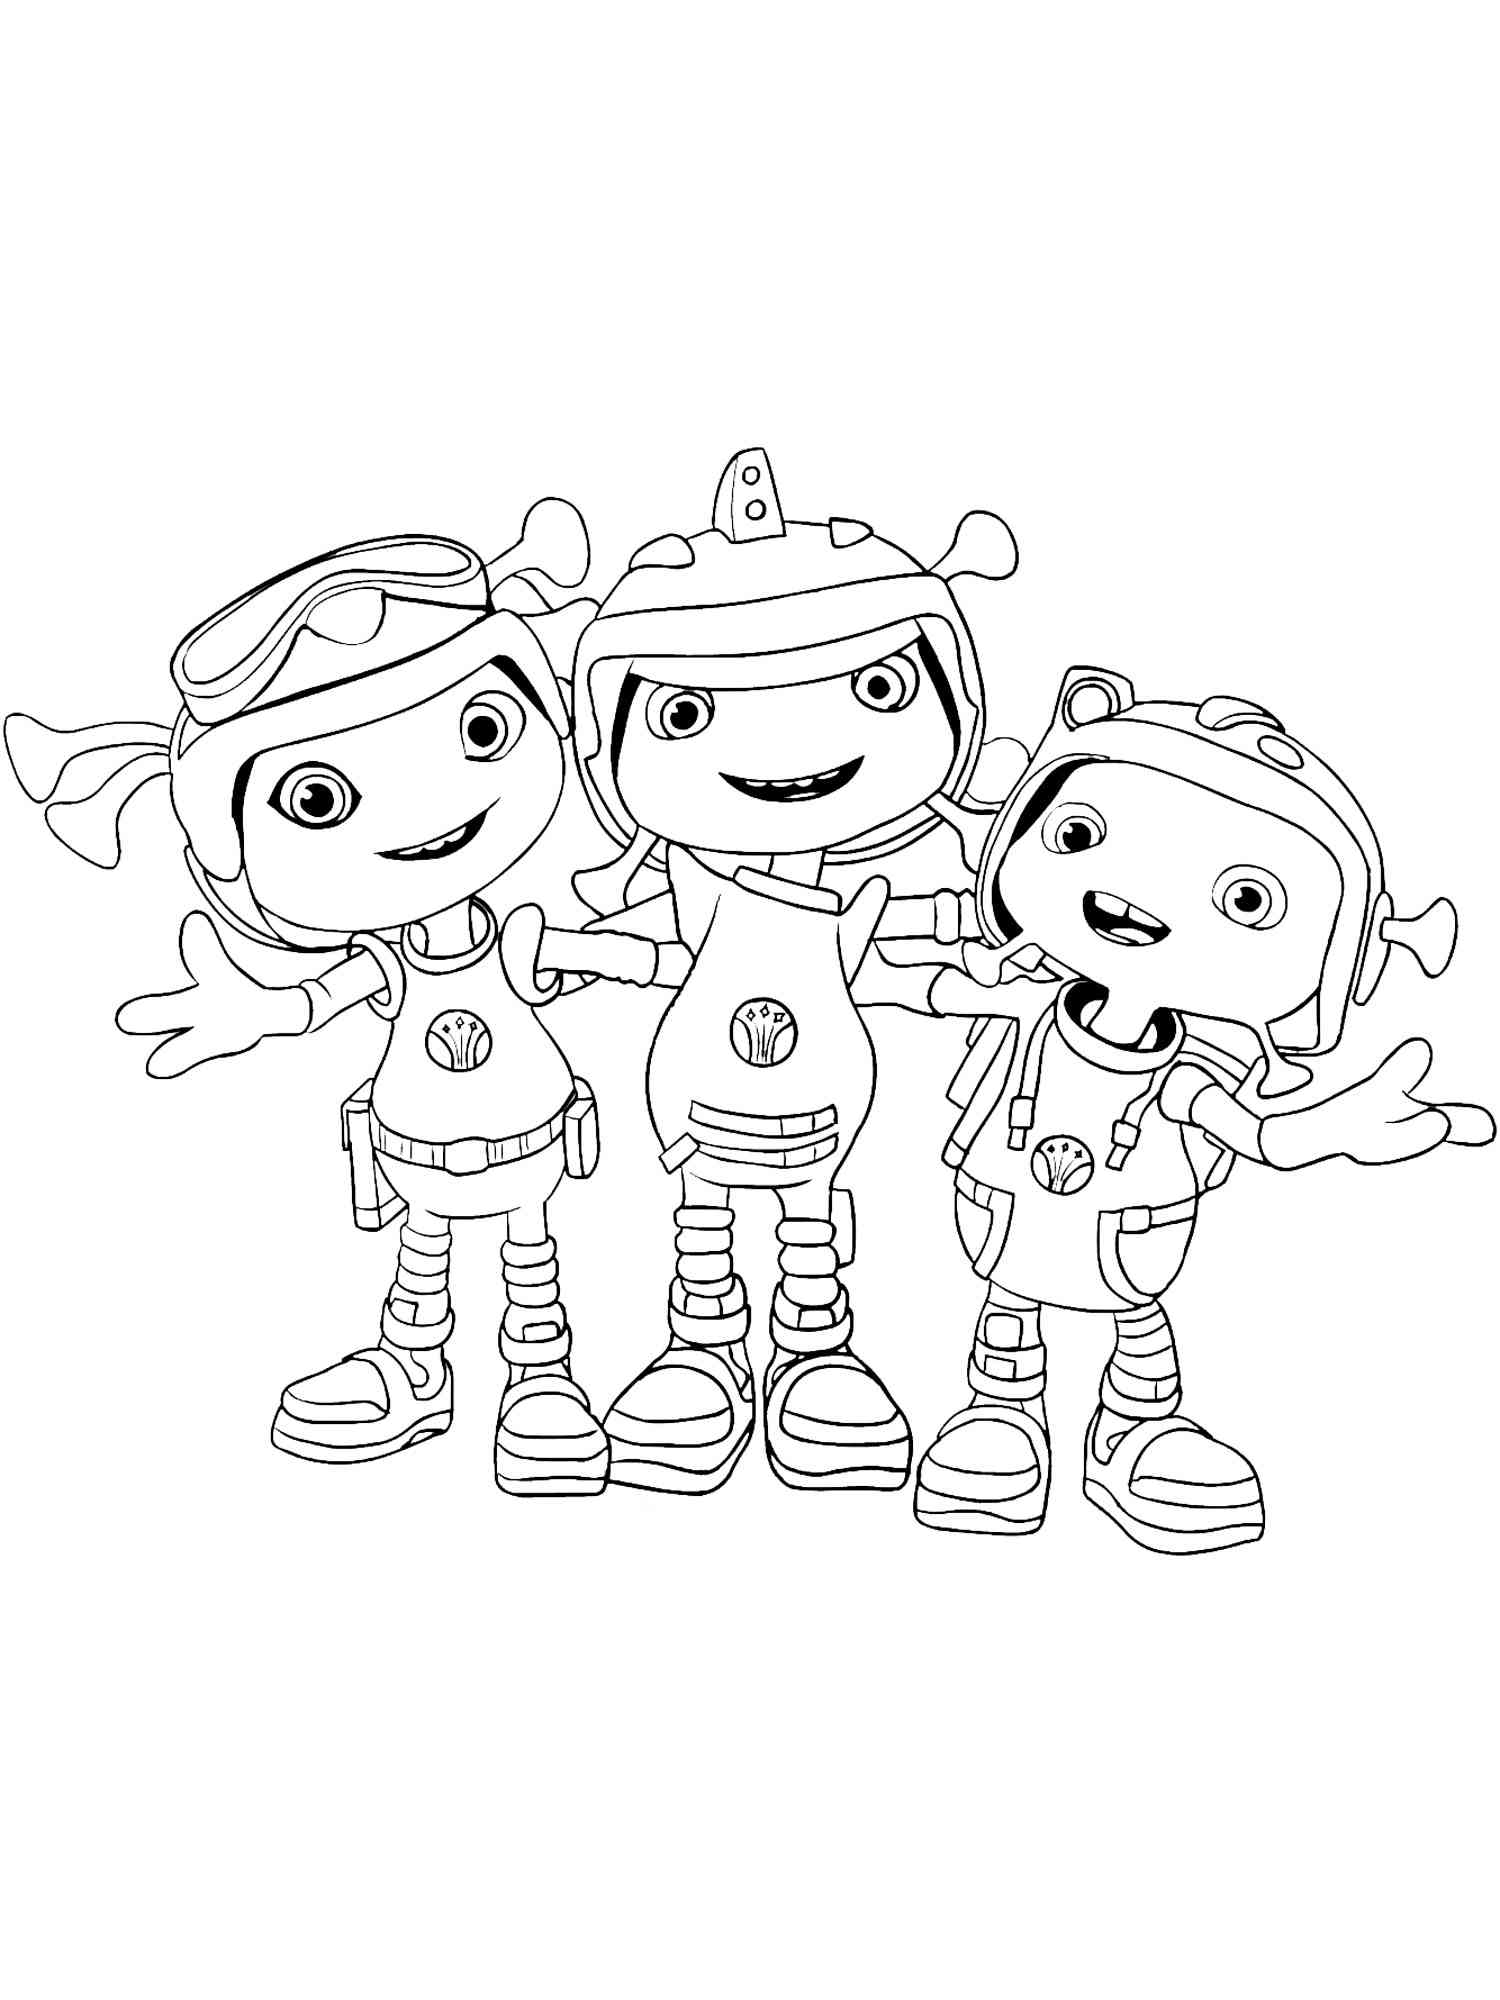 Floogals 7 coloring page